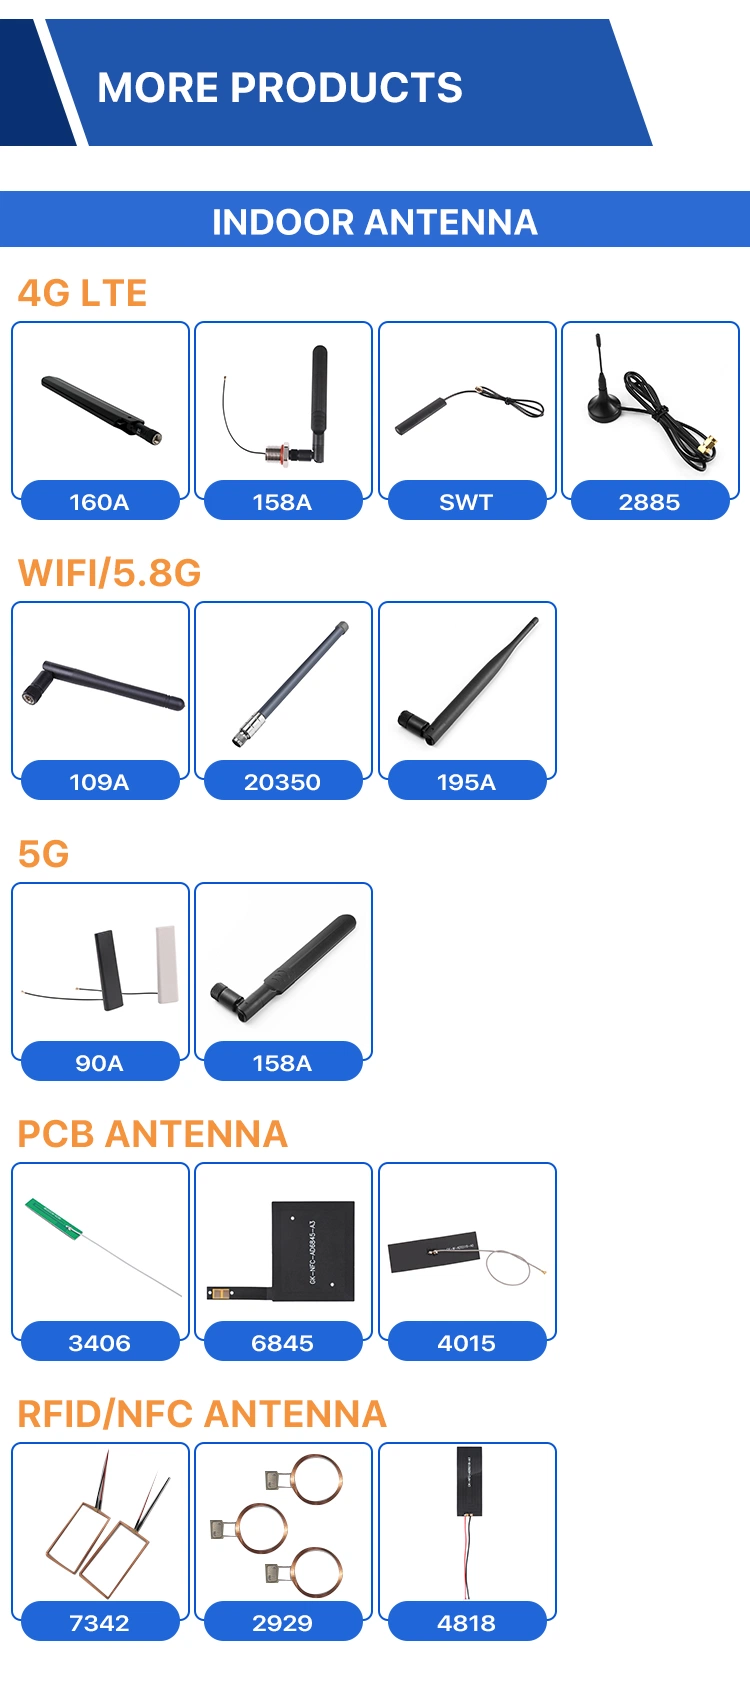 Built-in GPS Patch Active Antenna with U. Fl Connector GPS Patch Internal Antenna